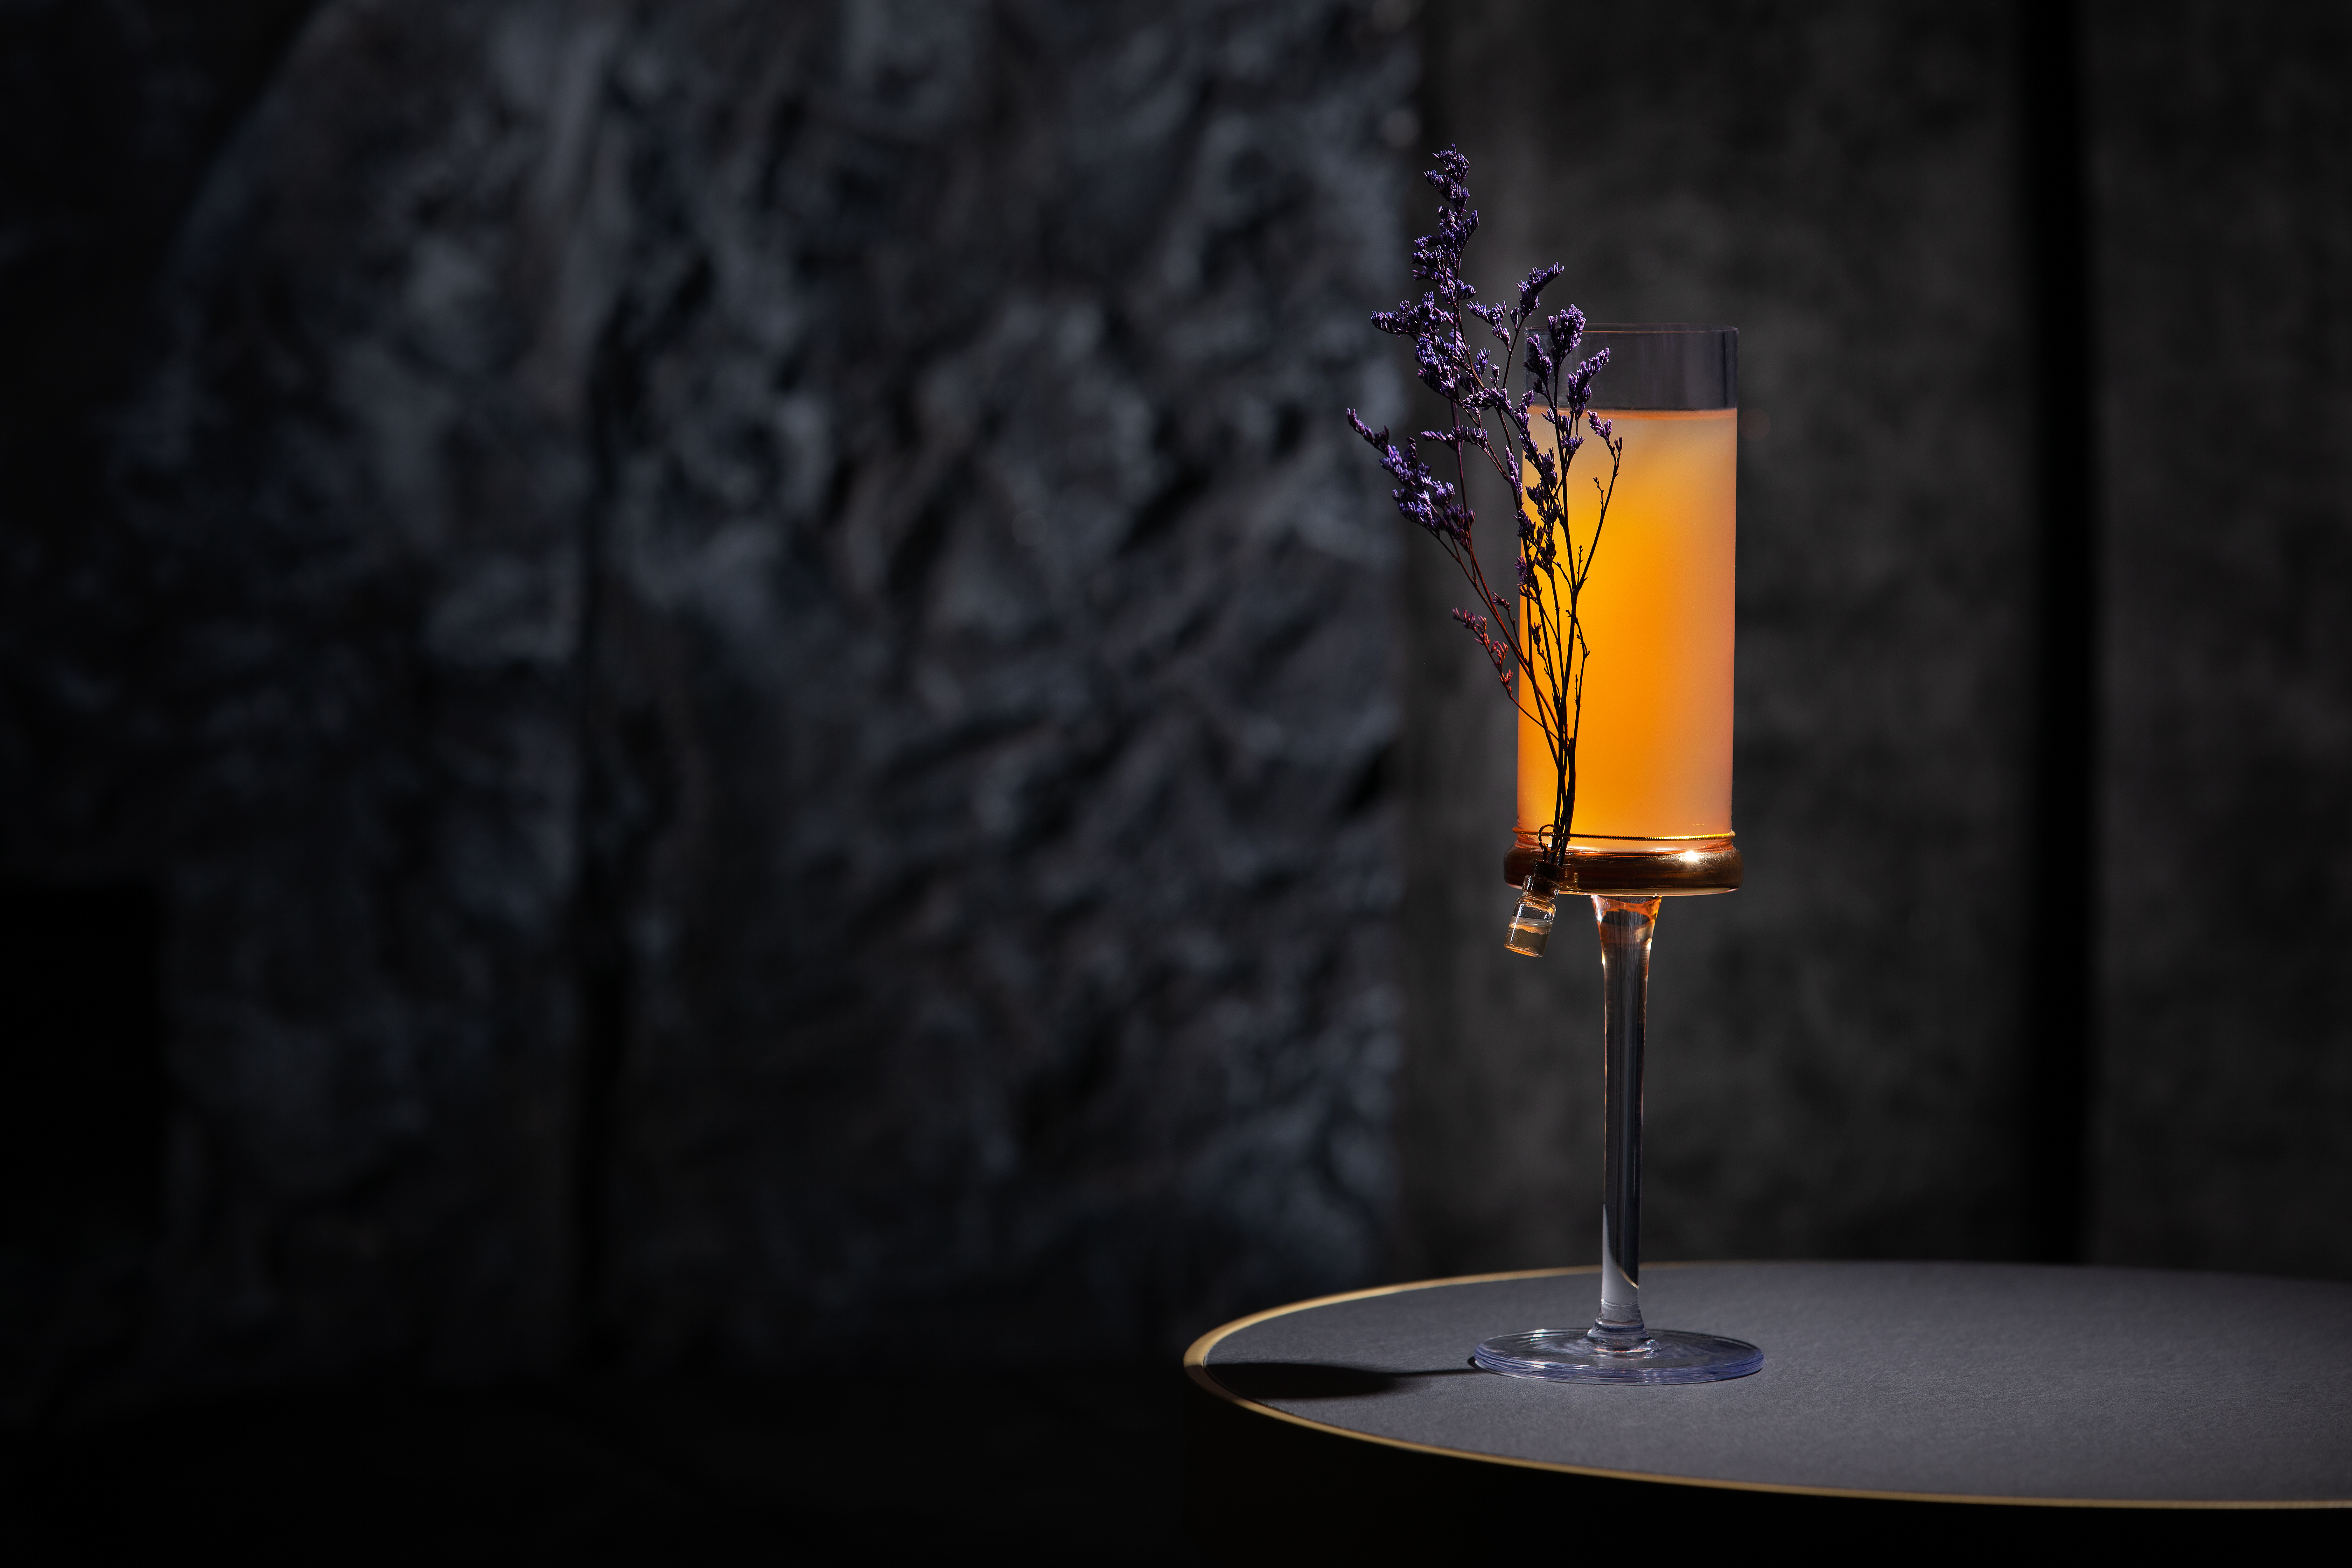 An orange cocktail is in a tall, narrow glass, embellished with a branch, photographed in front of a dark background.